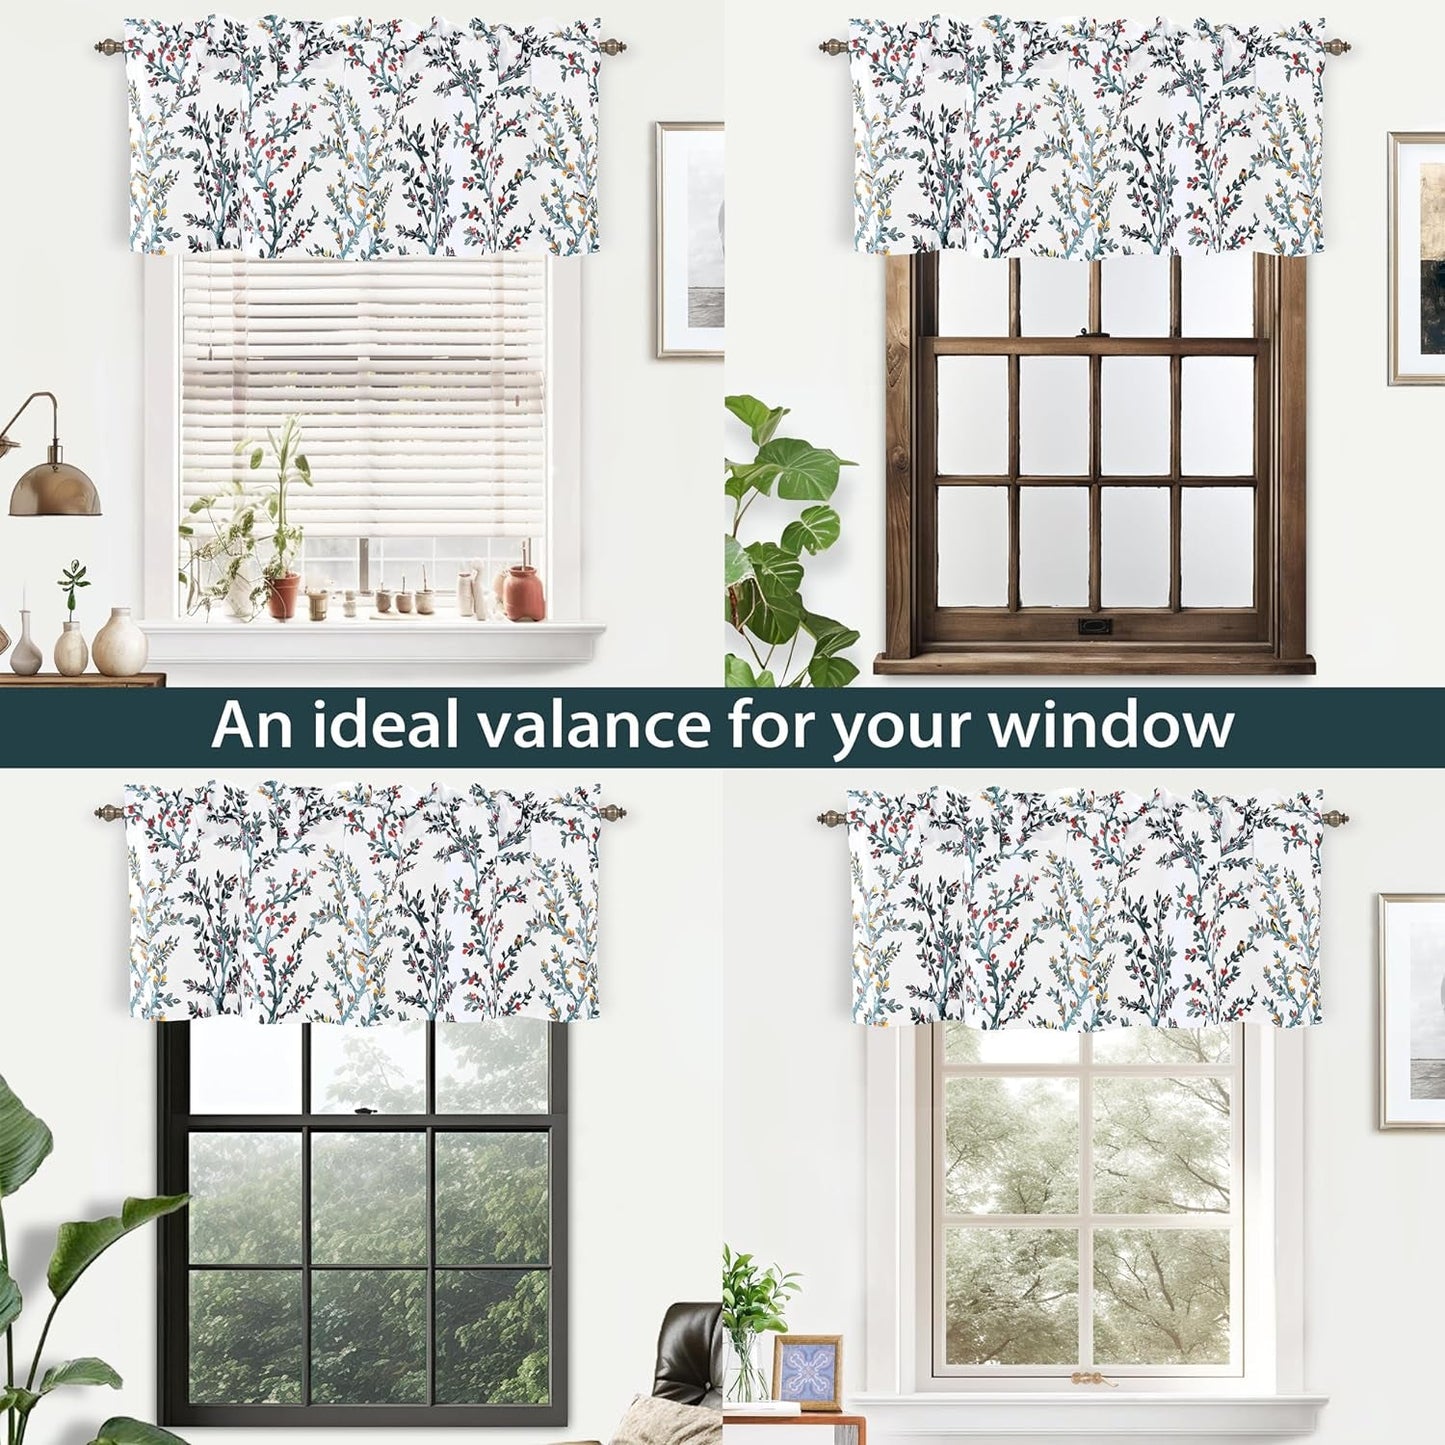 Driftaway Jasmine Watercolor Branch Botanical Thermal Insulated Energy Saving Window Curtain Valance for Living Room Bedroom Kitchen 2 Layers 52 Inch by 18 Inch plus 2 Inch Header Multi 1 Pack